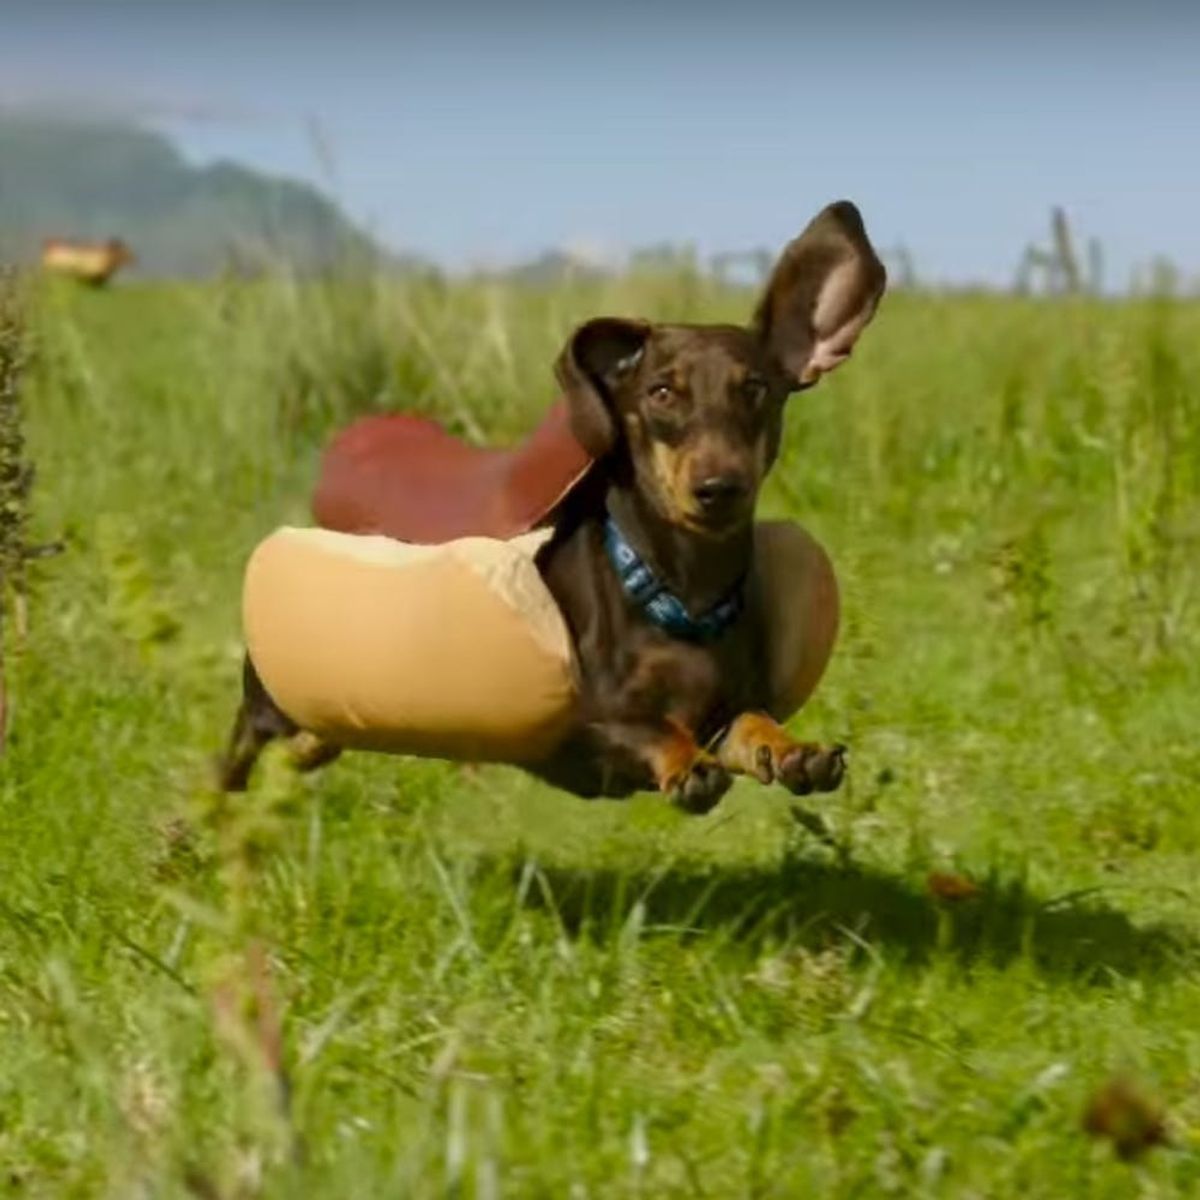 This Heinz Super Bowl Ad Is the Cute Dog Commercial You’ve Been Waiting For